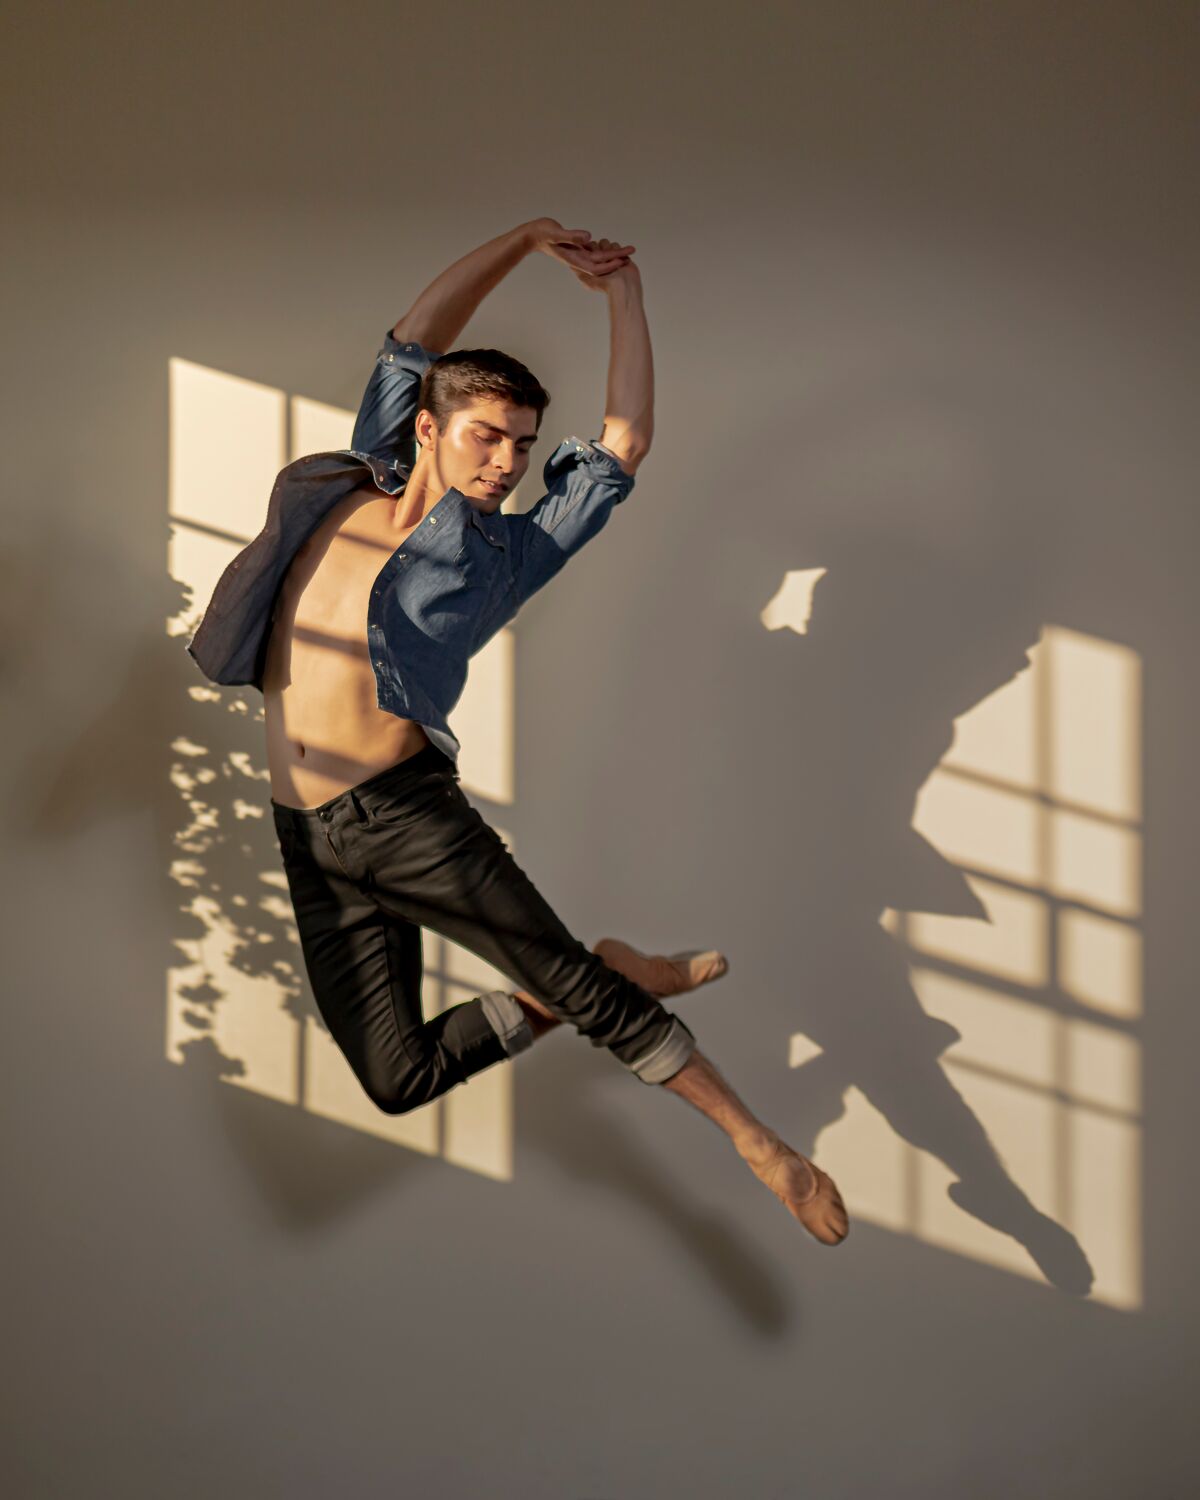 San Diego Ballet will present "Ritmos Latinos" on Oct. 30-31 and Nov. 6-7 at the Arts District at Liberty Station.